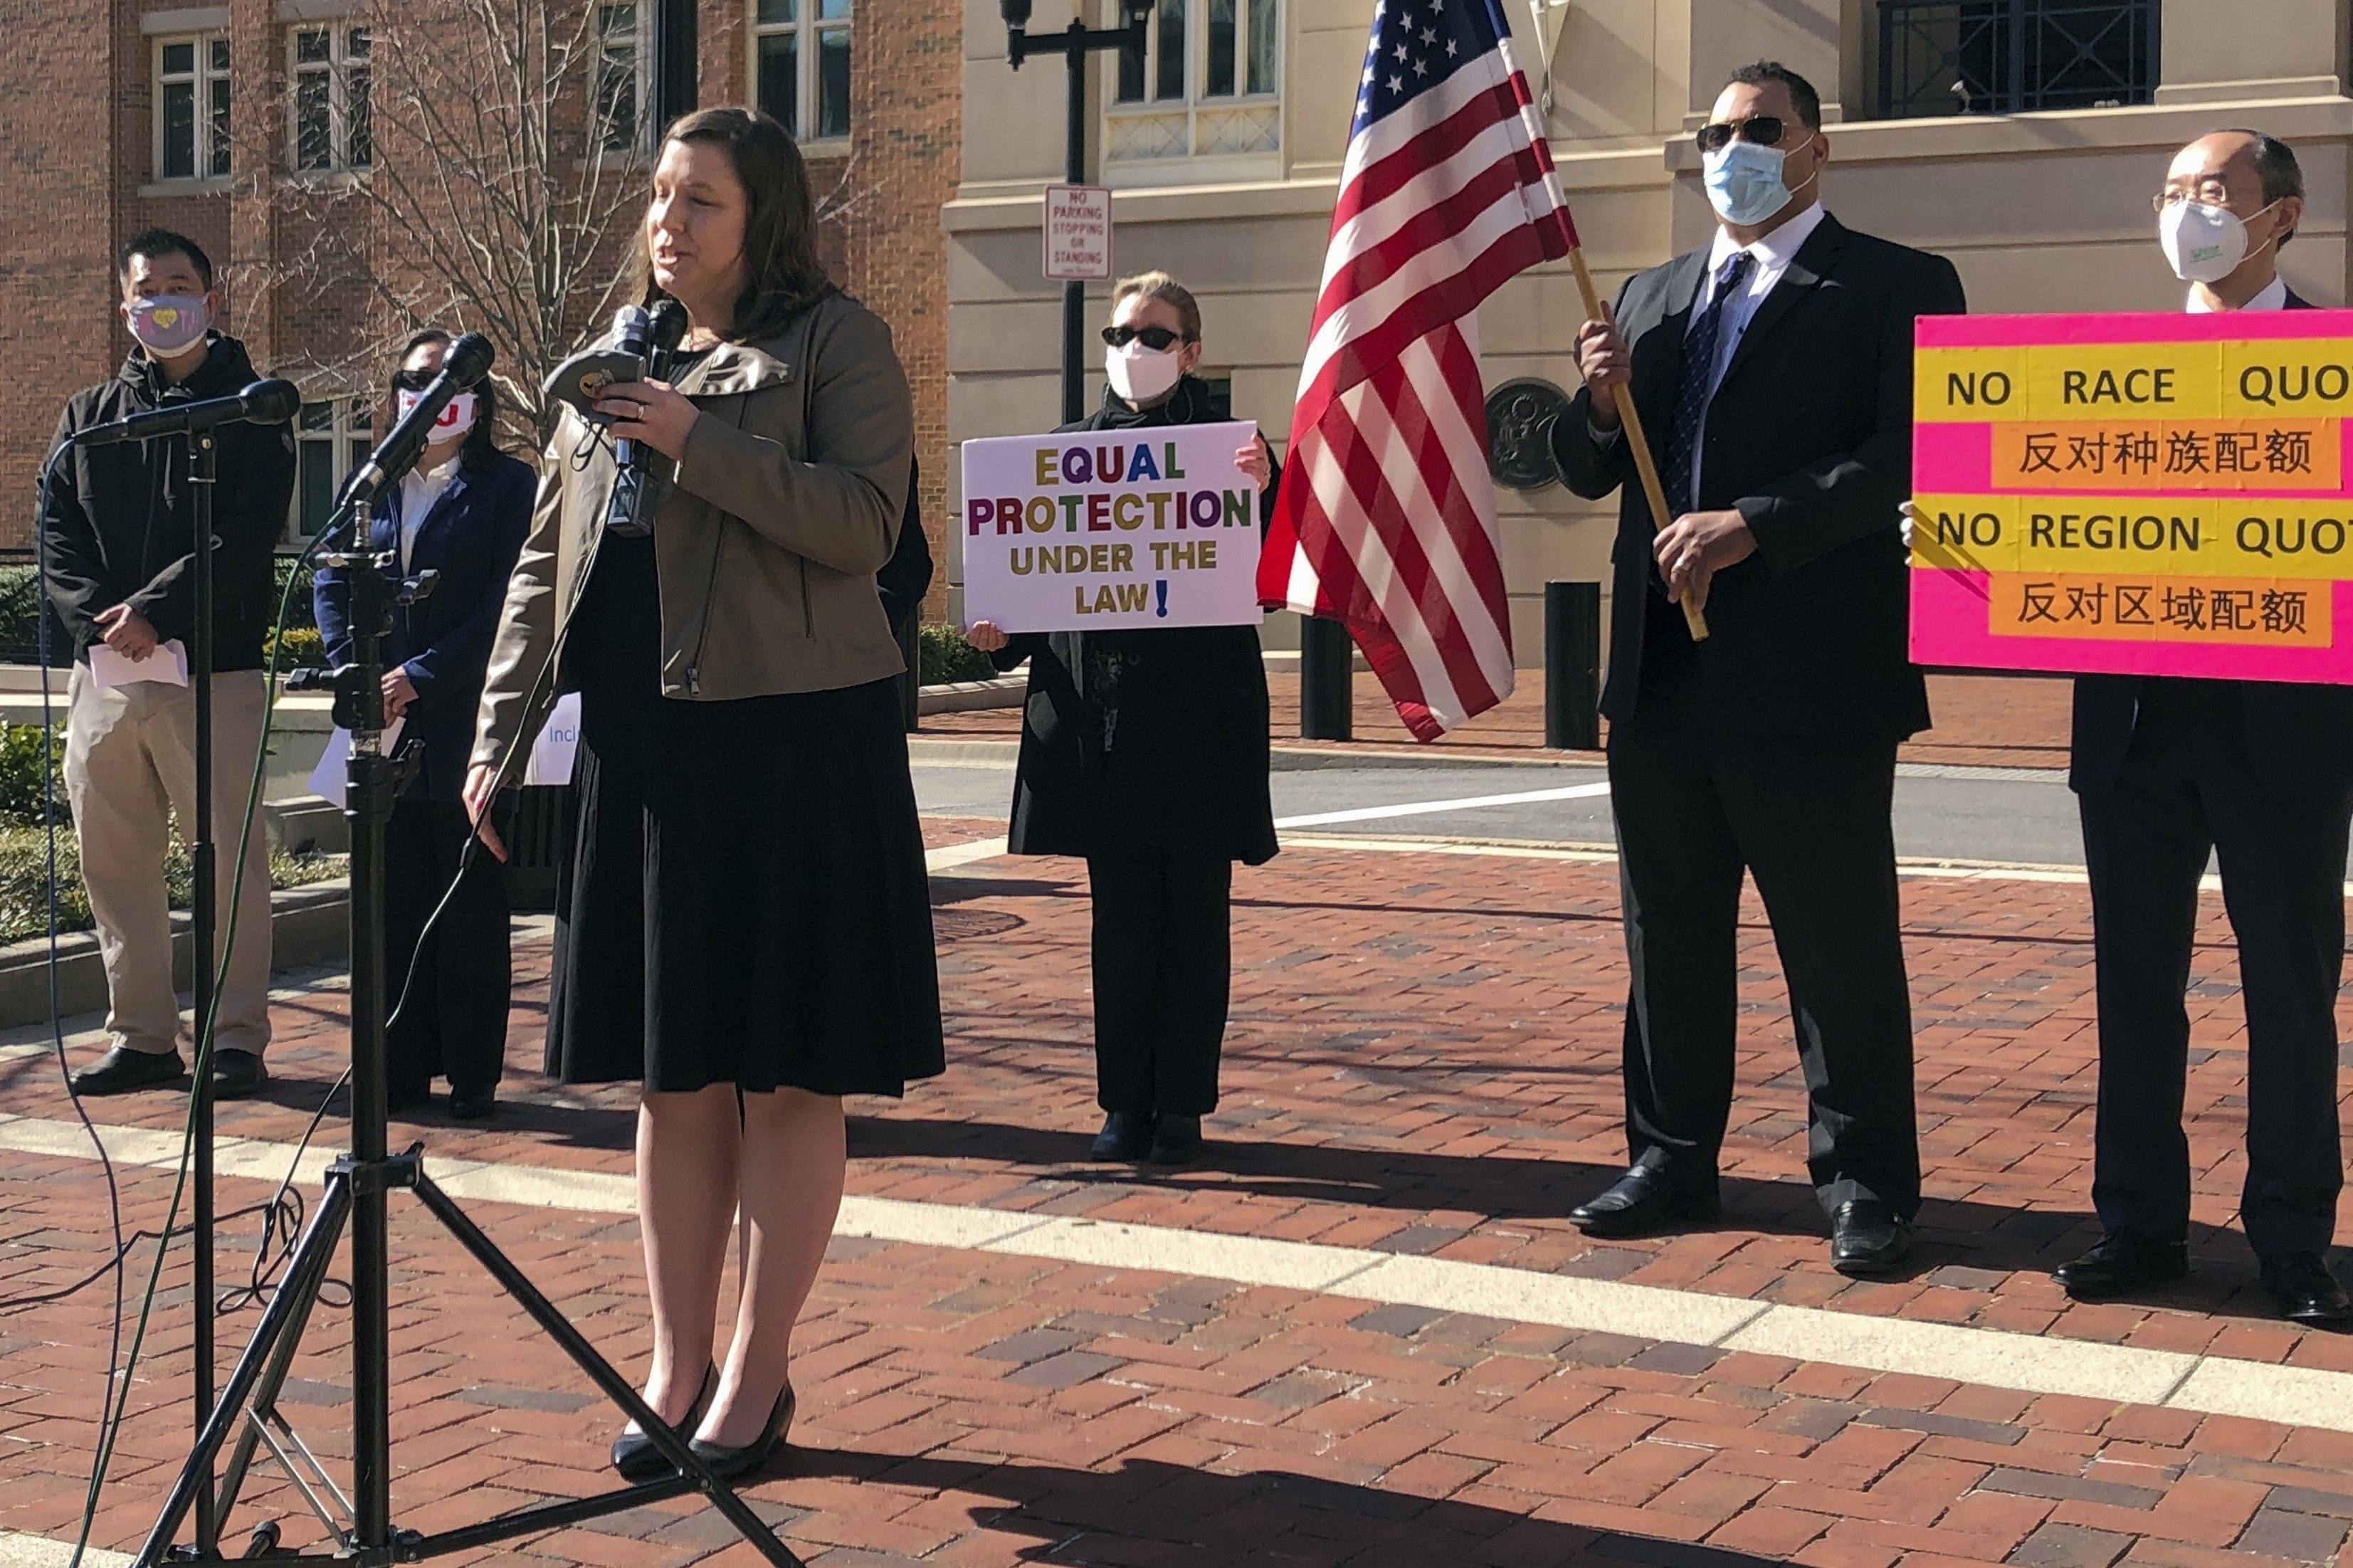 Pacific Legal Foundation lawyer Erin Wilcox speaks outside the federal courthouse in Alexandria, Virginia, in March 2021. Her organisation has filed a lawsuit alleging discrimination against Asian-Americans over the revised admissions process for Thomas Jefferson High School for Science and Technology. Photo: AP